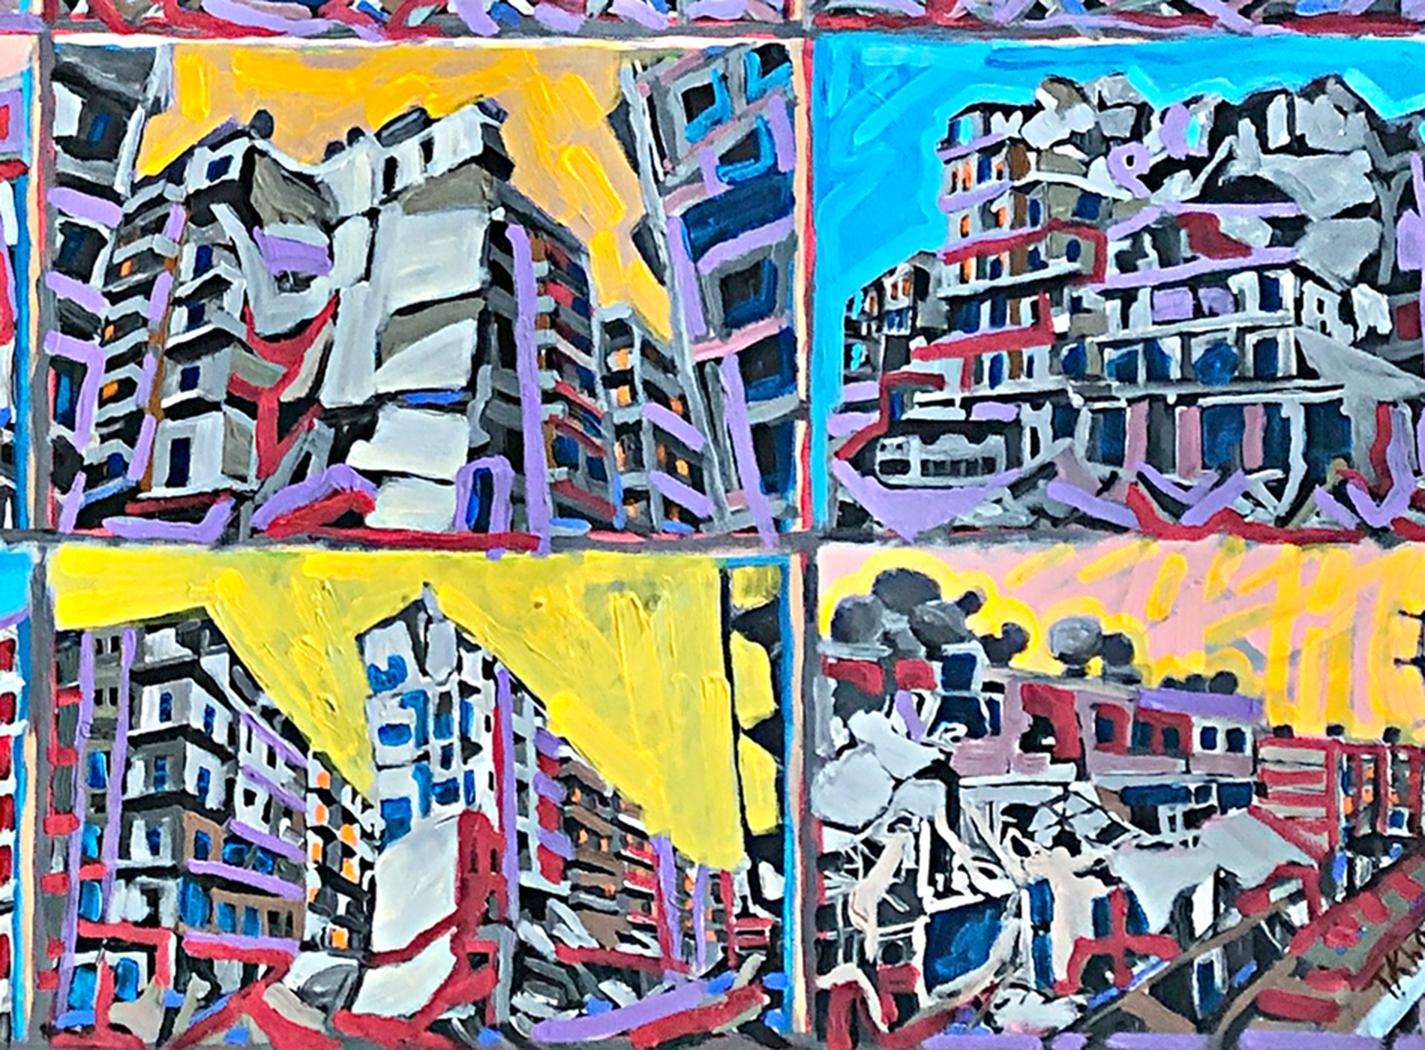 This painting is one of ‘Aleppo and Kyiv Urban Landscape No.2’ series featuring many windows gazing at the world. This is a collection of different neighborhoods in Aleppo city that resembles Kyiv urban scenes of collapsed apartment floors, fallen